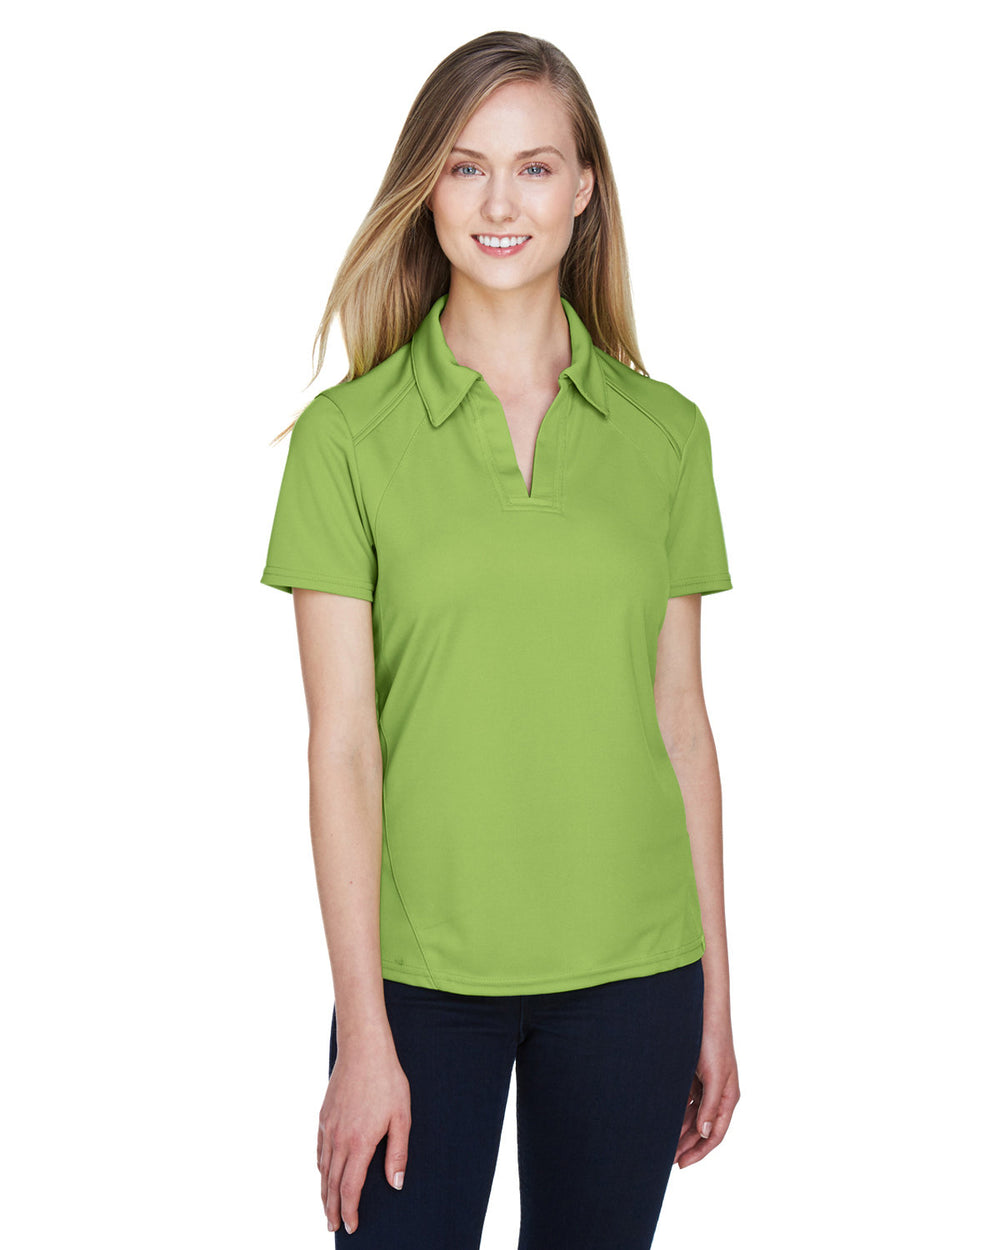 North End 78632 Ladies' Recycled Polyester Performance Piqu Polo